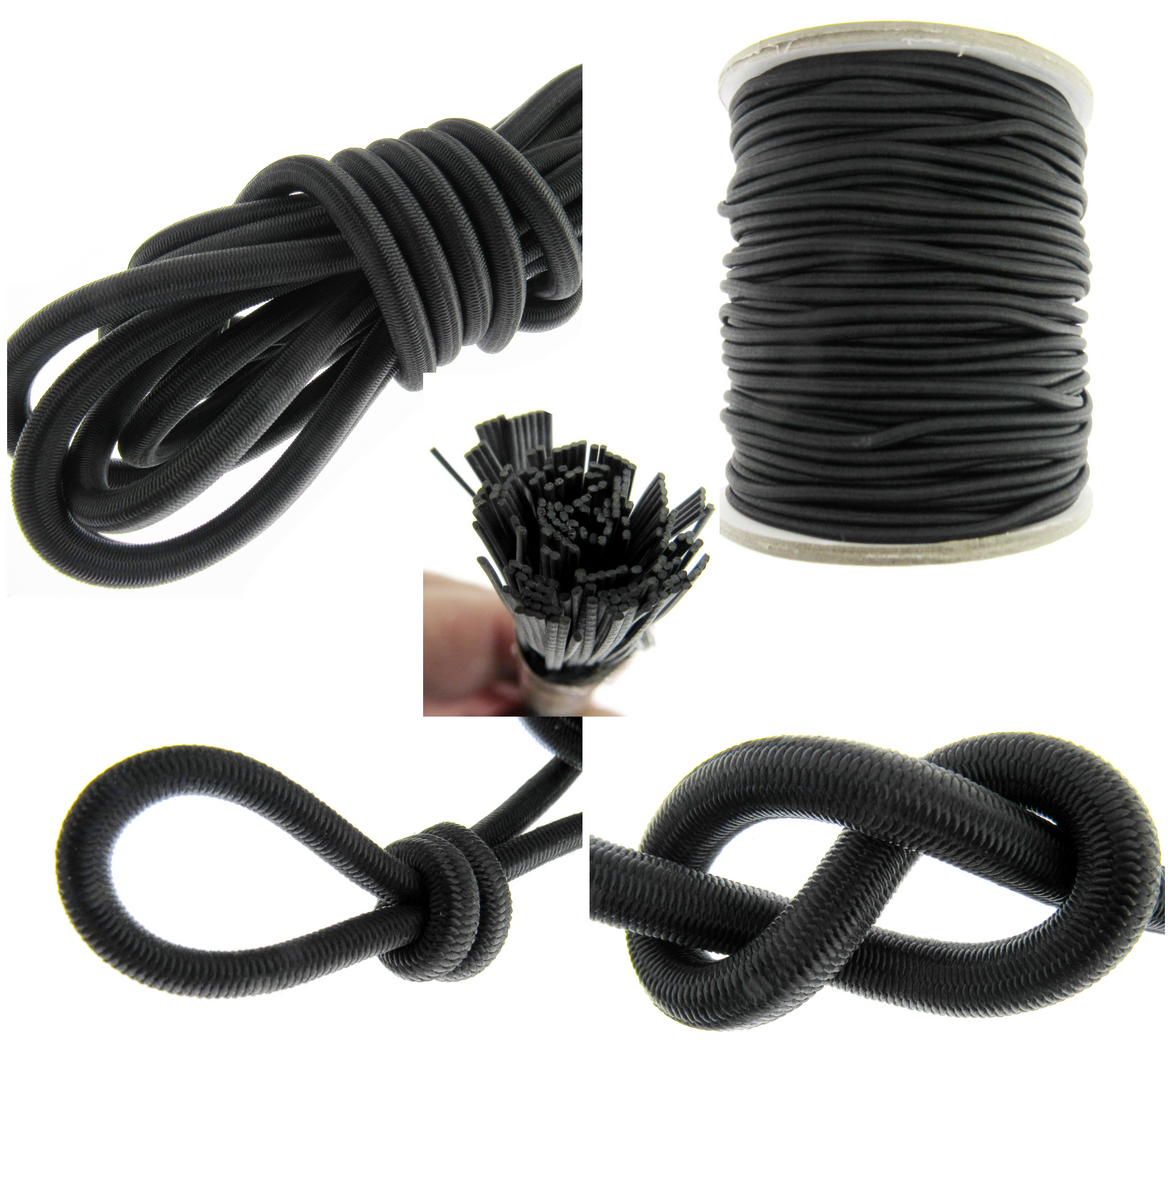 BLACK ELASTIC BUNGEE ROPE SHOCK CORD TIE DOWN ALL SIZES 3mm 5mm 6mm & 8mm